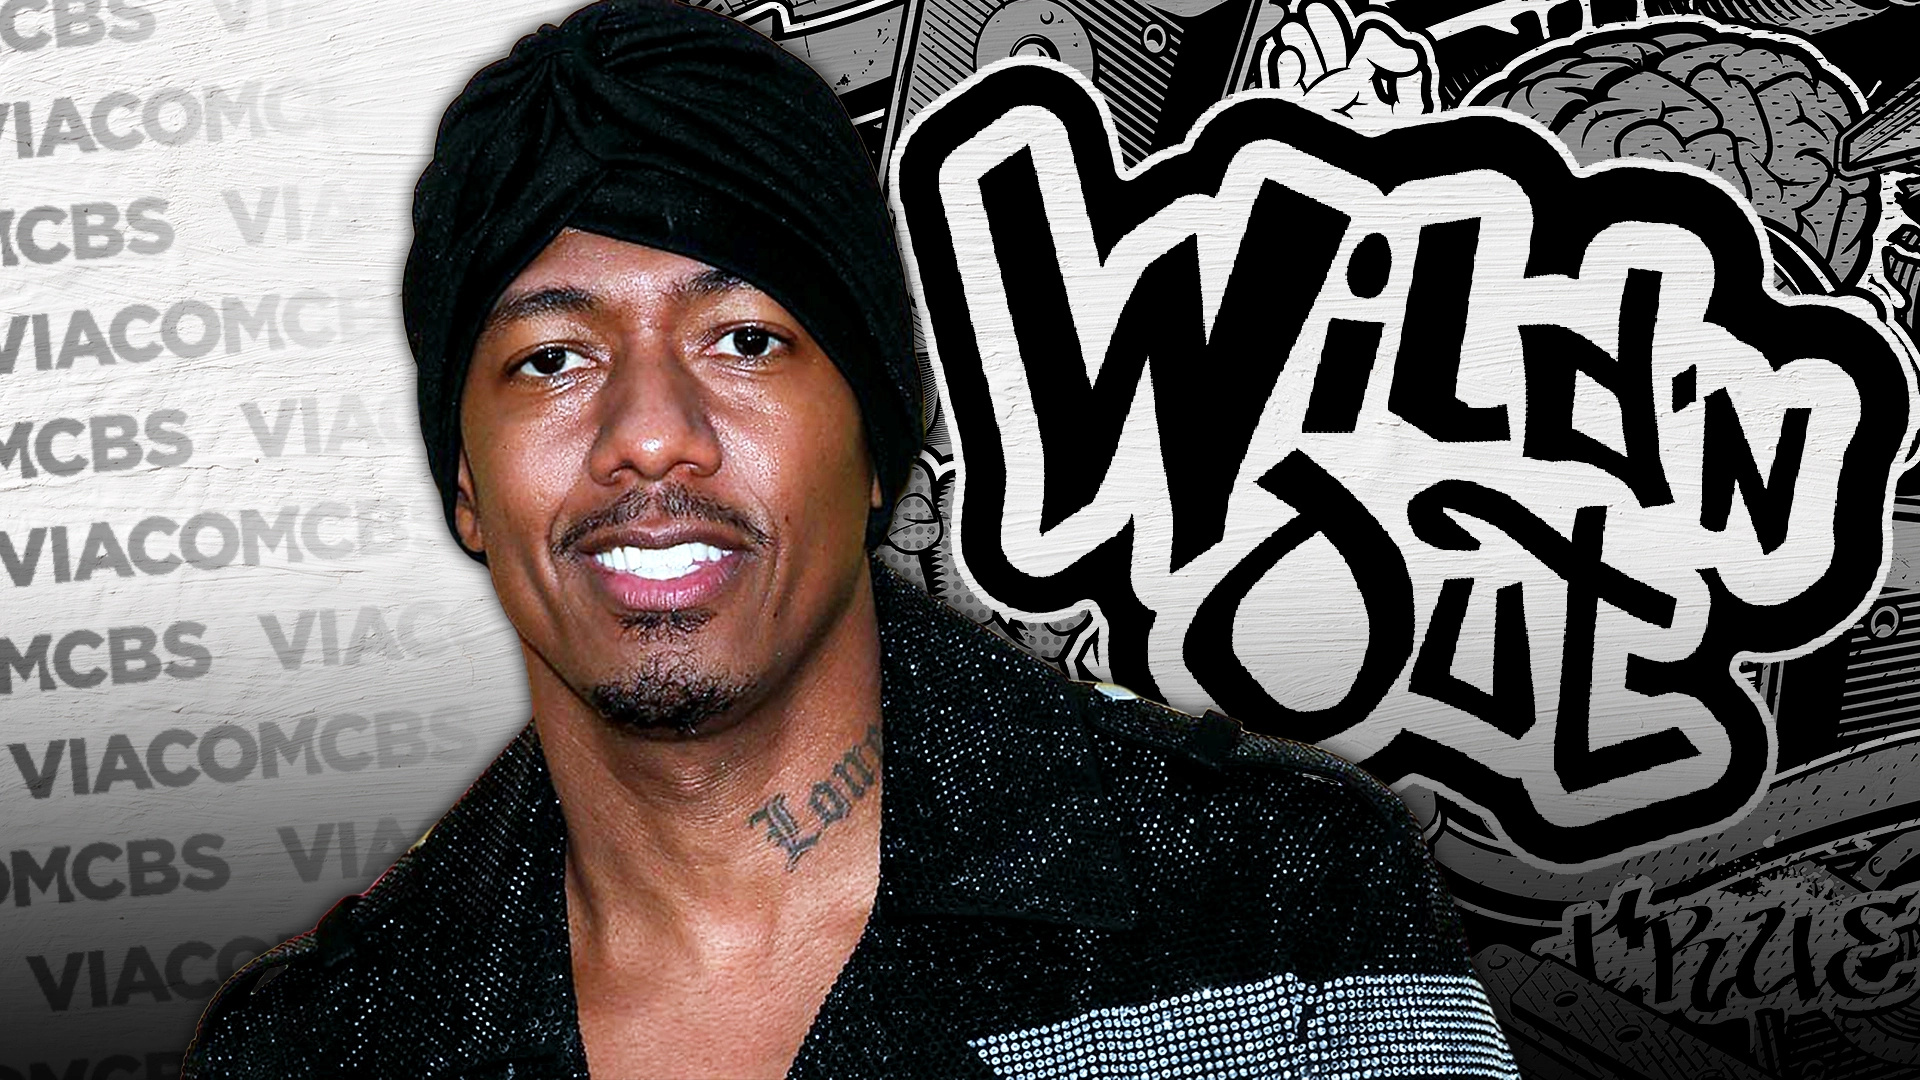 Nick Cannon, Jewish community apology, Rights to Wild 'N Out, Response to firing, 1920x1080 Full HD Desktop